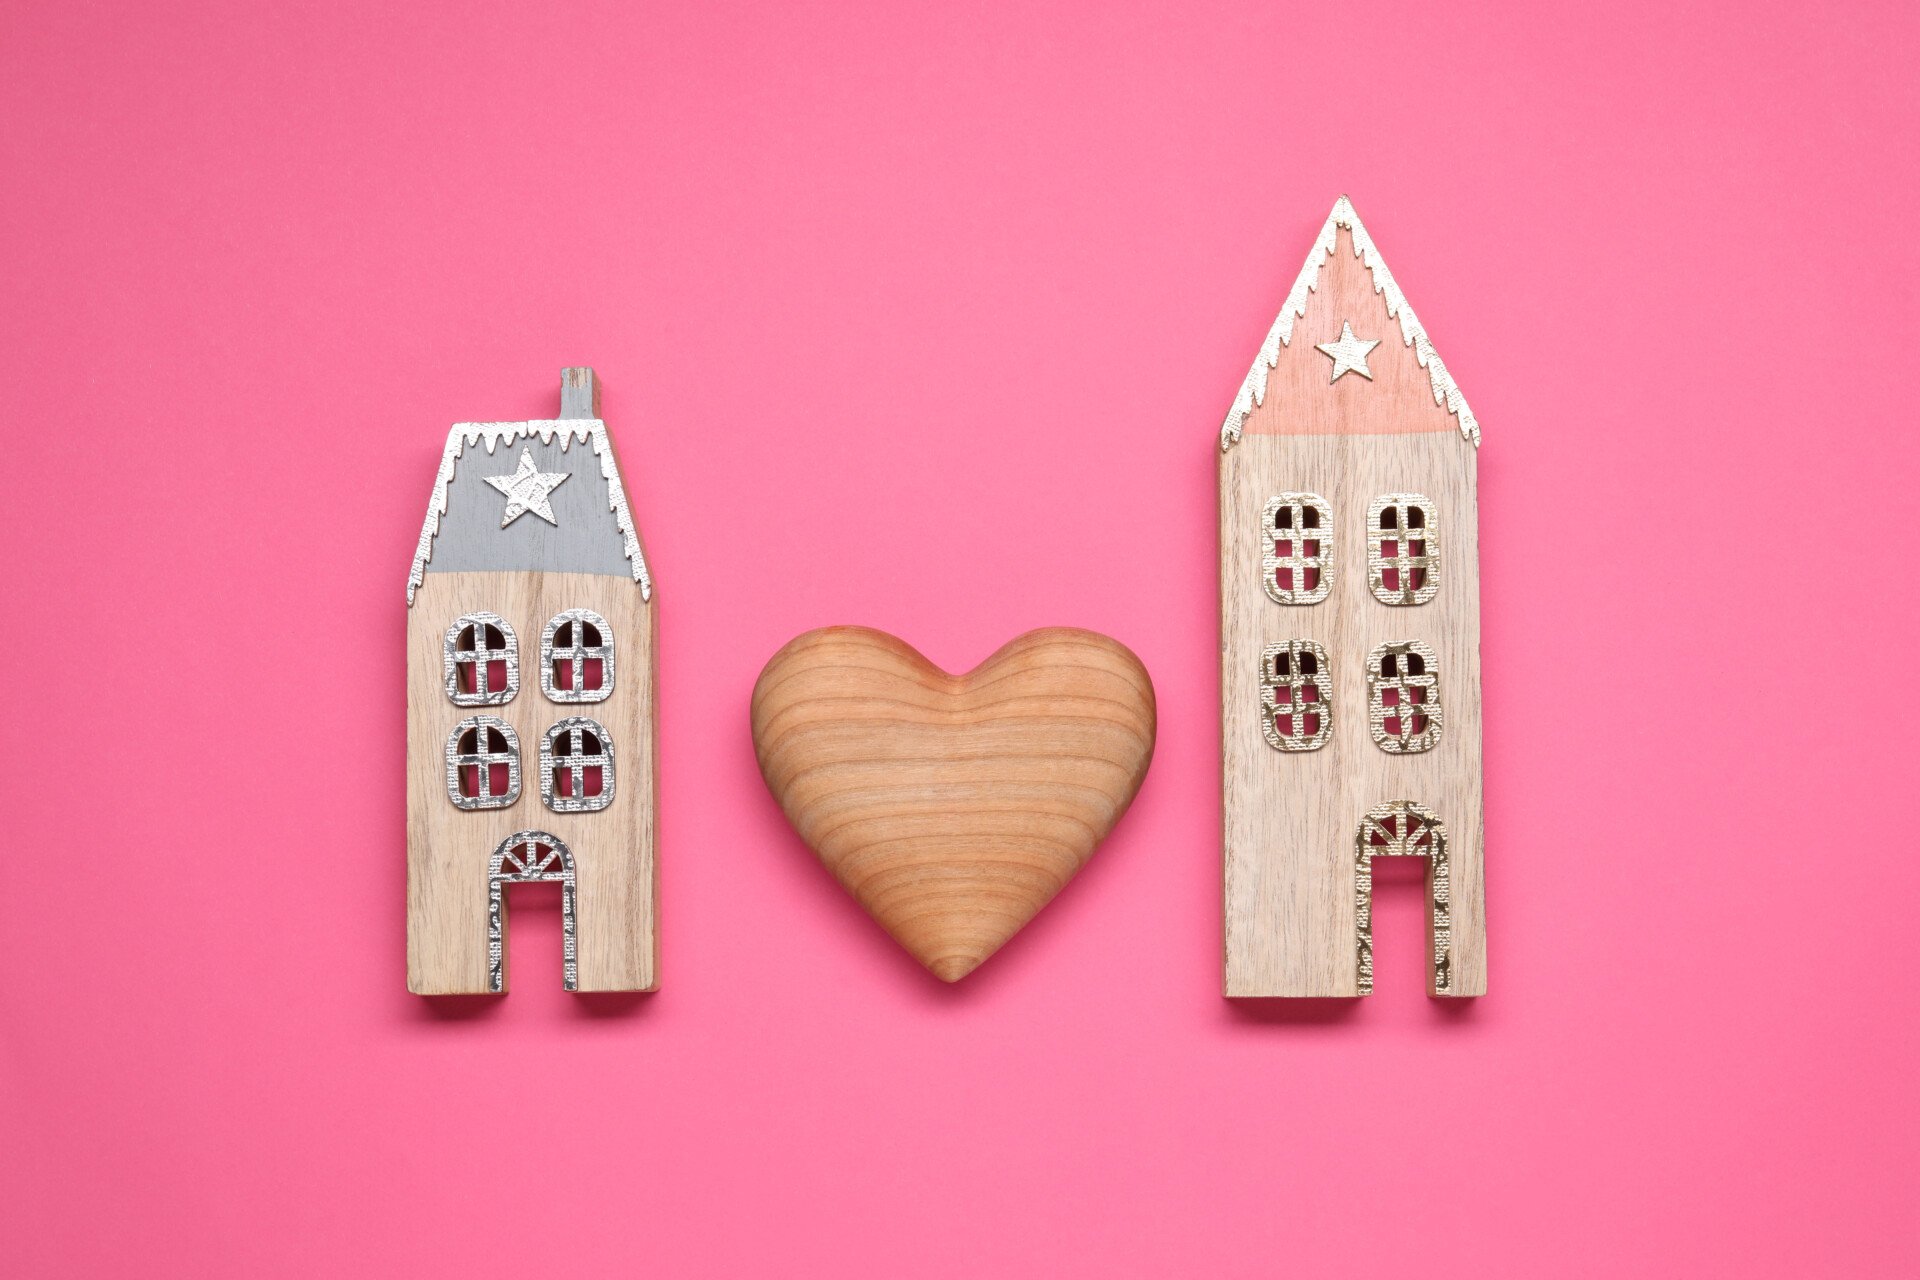 Decorative heart between two house models on pink background